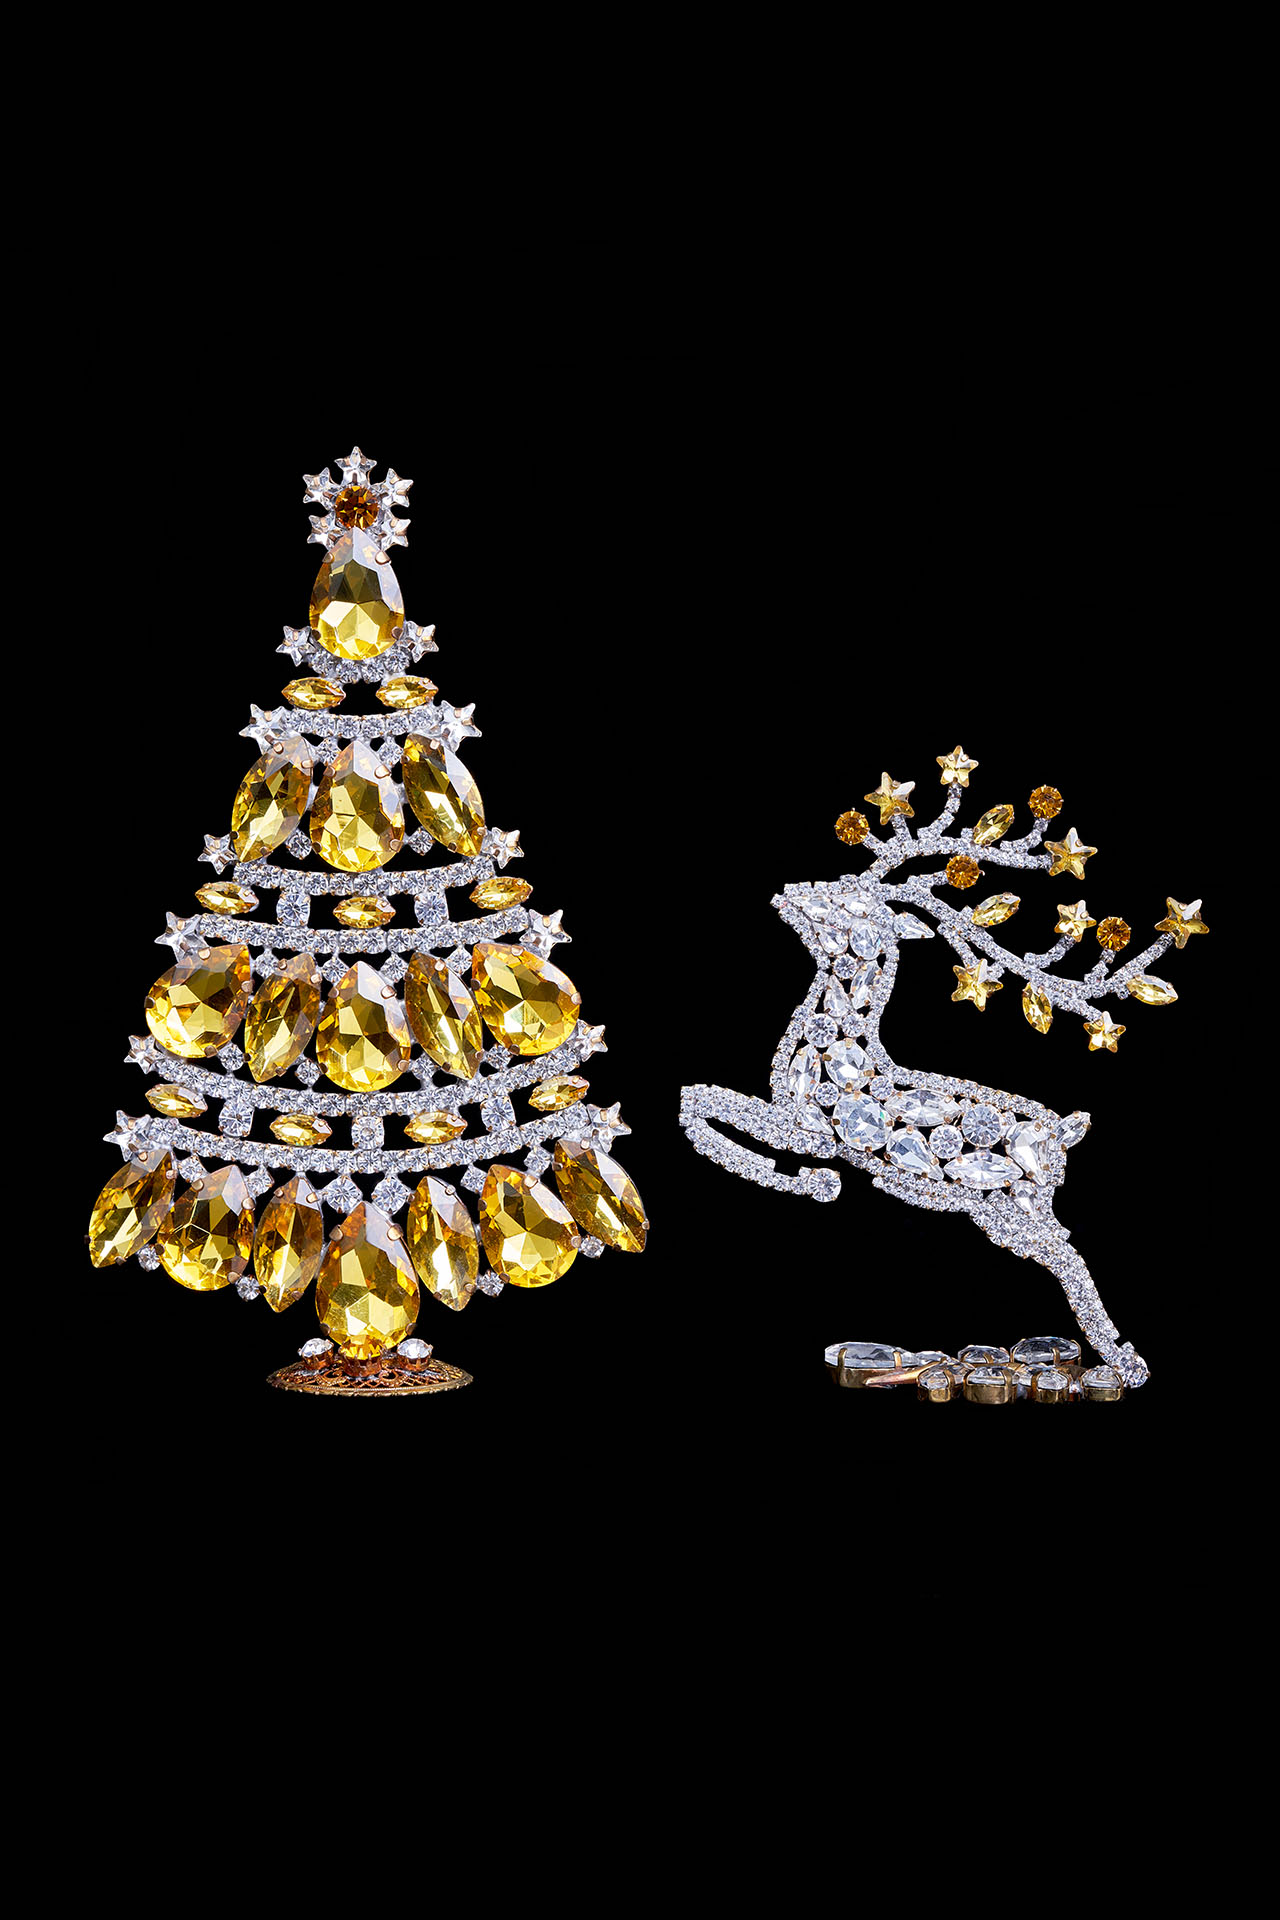 Christmas tree and reindeer from clear and yellow rhinestones